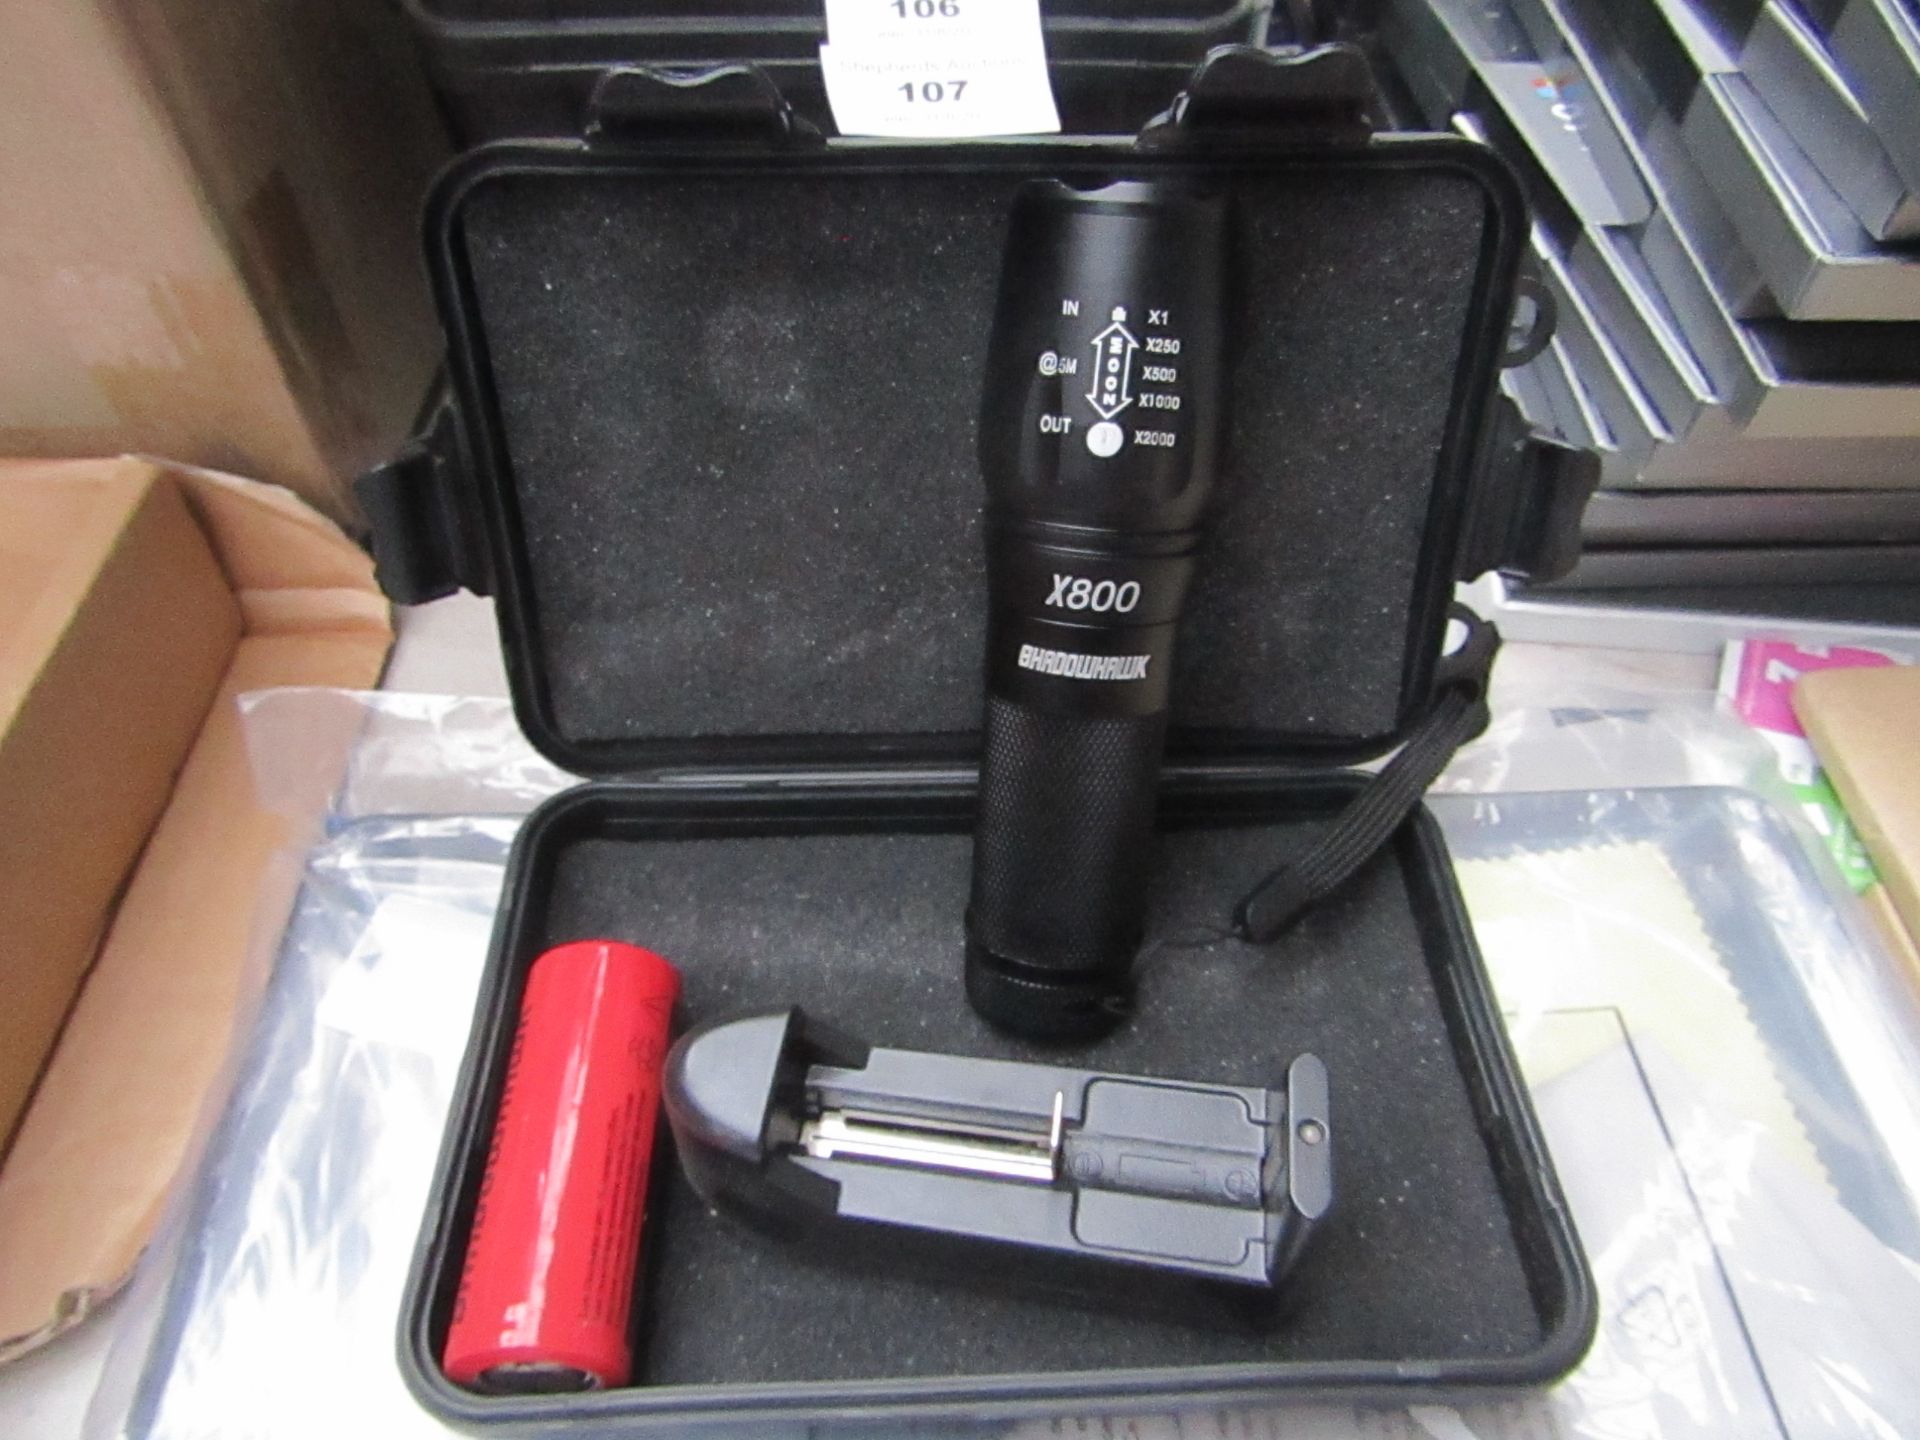 Shadow hawk rechargable high powered torch, new in carry case